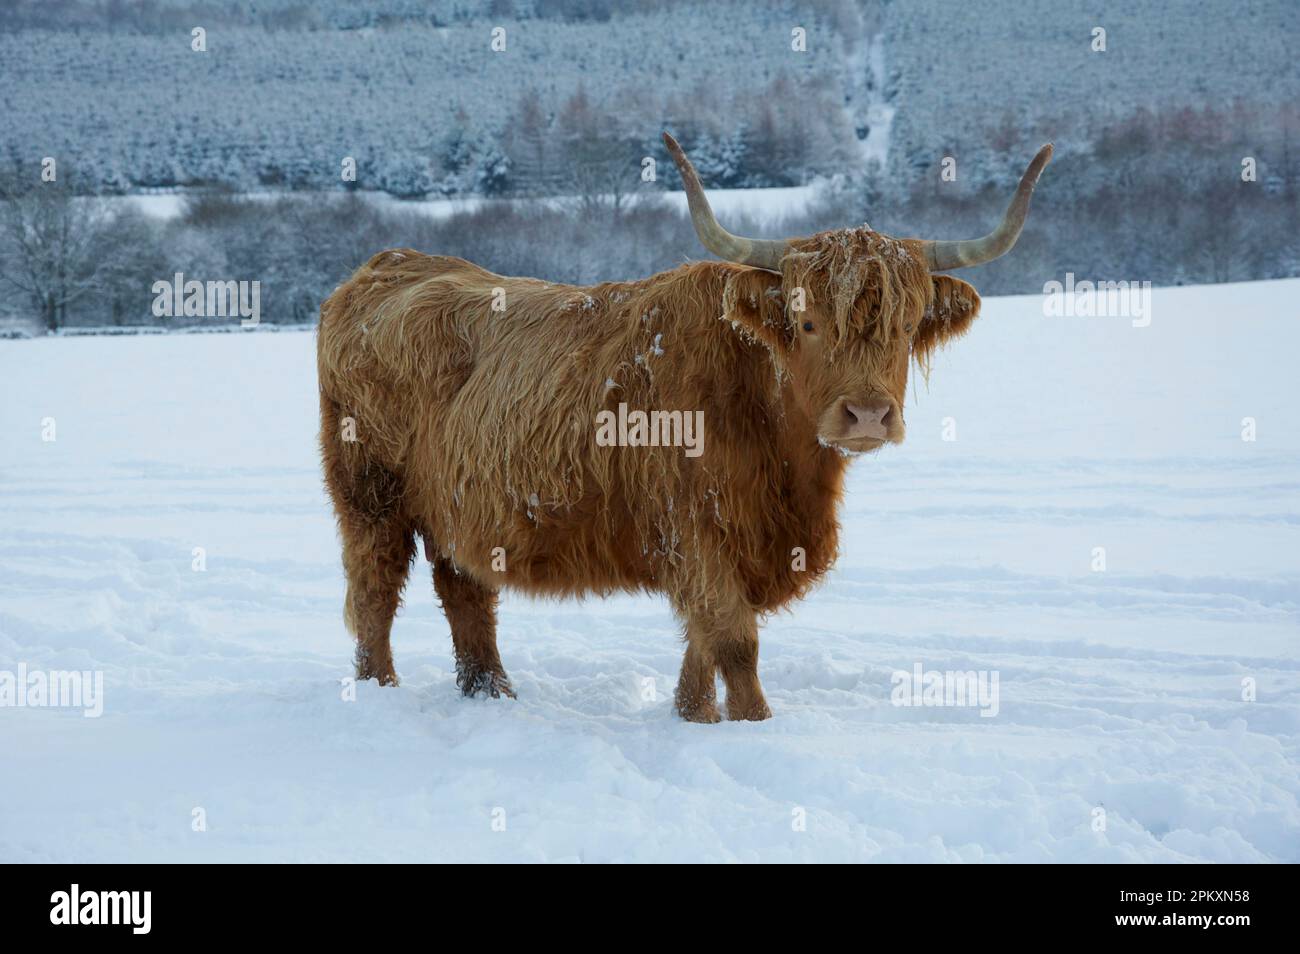 Domestic Cattle, Highland Cattle, cow standing in snow covered pasture, Dumfries and Galloway, Scotland, United Kingdom Stock Photo